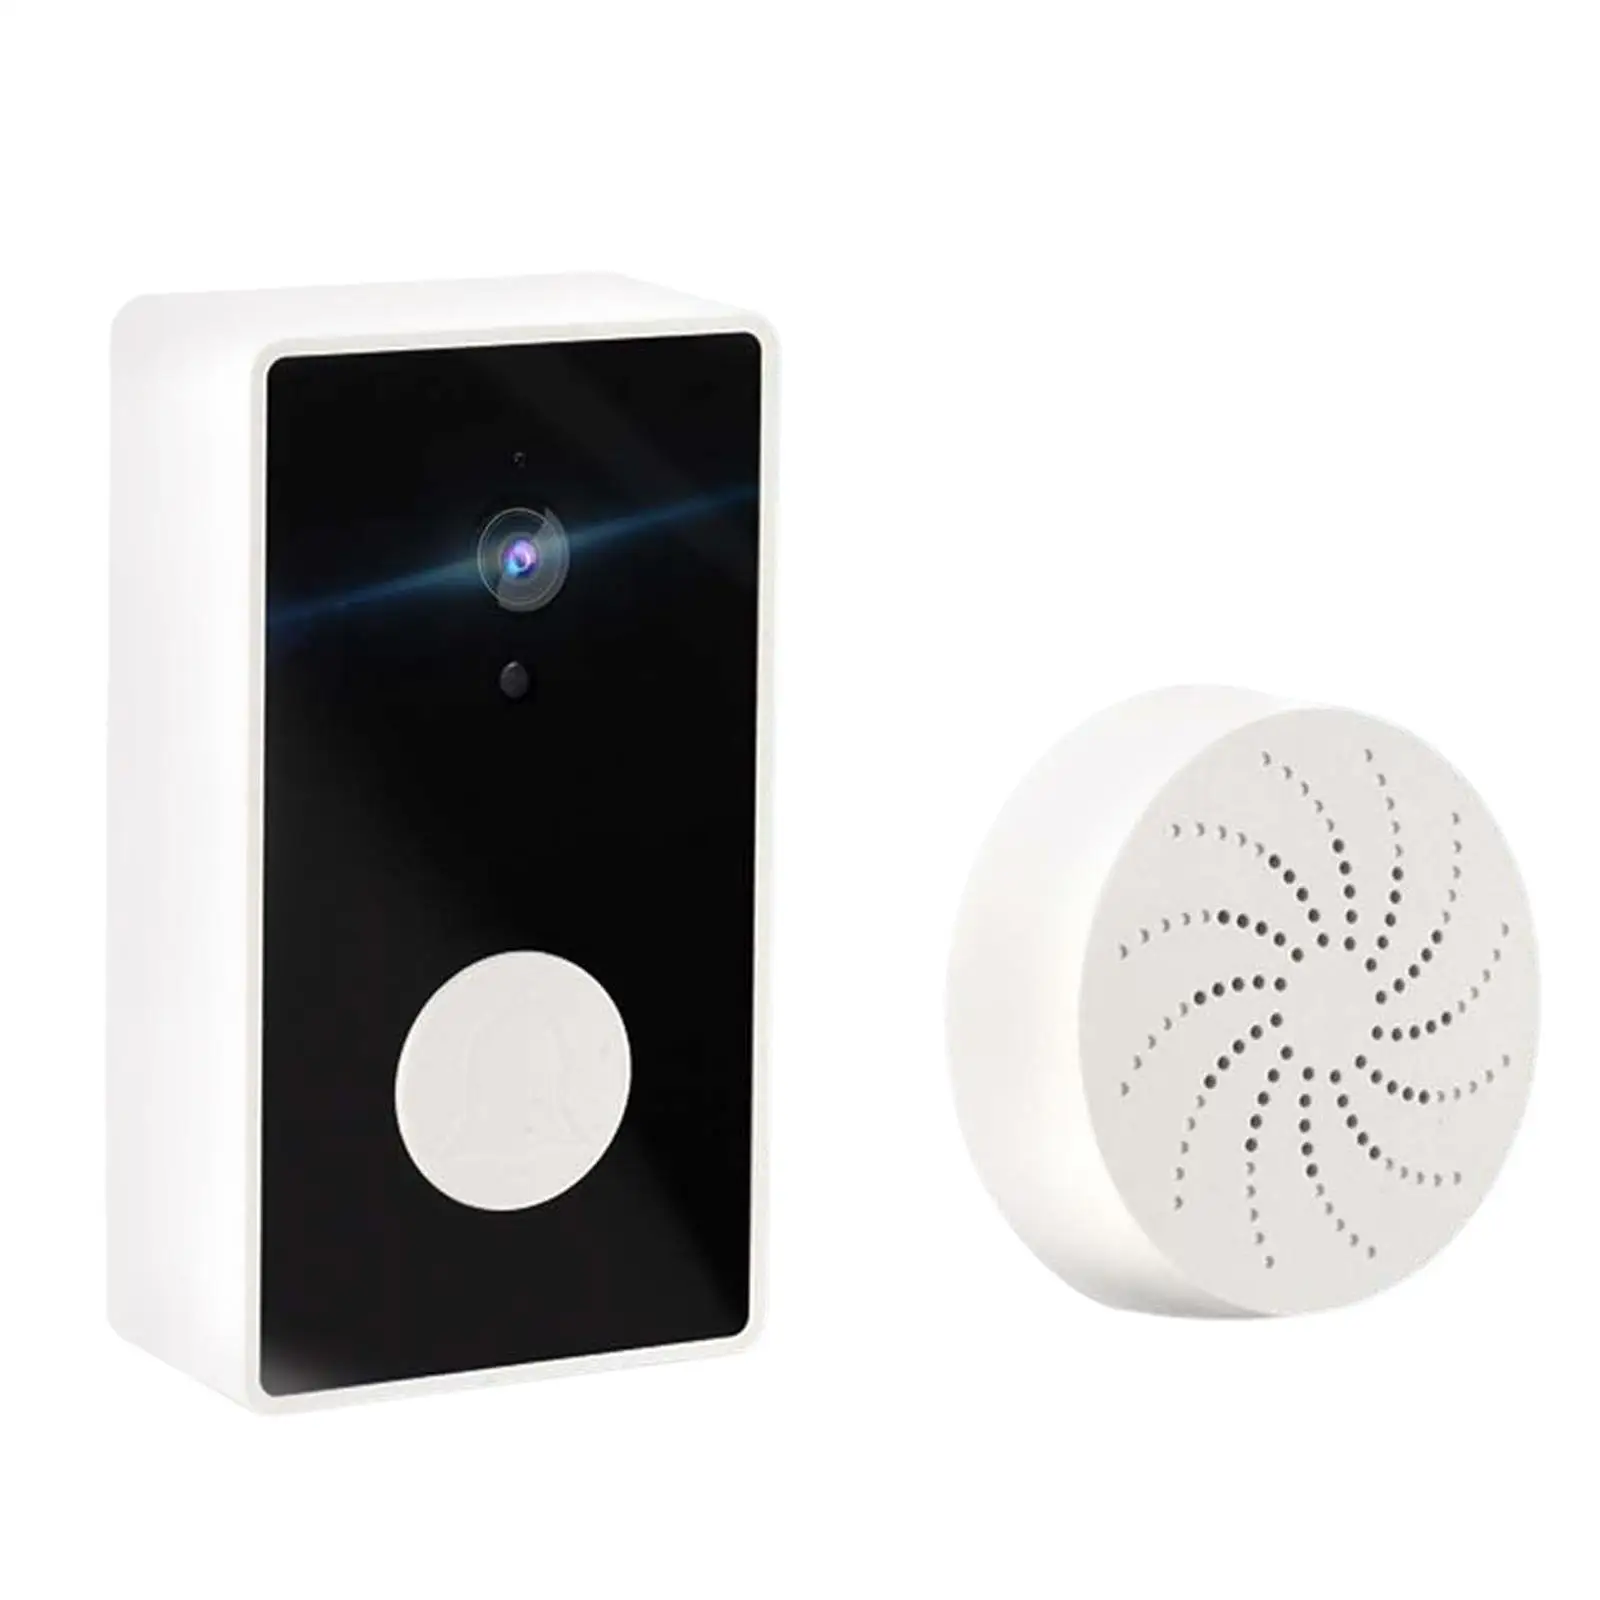 Wireless WiFi Video Doorbell Camera Smart Video Doorbell WiFi Smart Camera Doorbell Wide Angle Storage 2.4G with Chime for Home